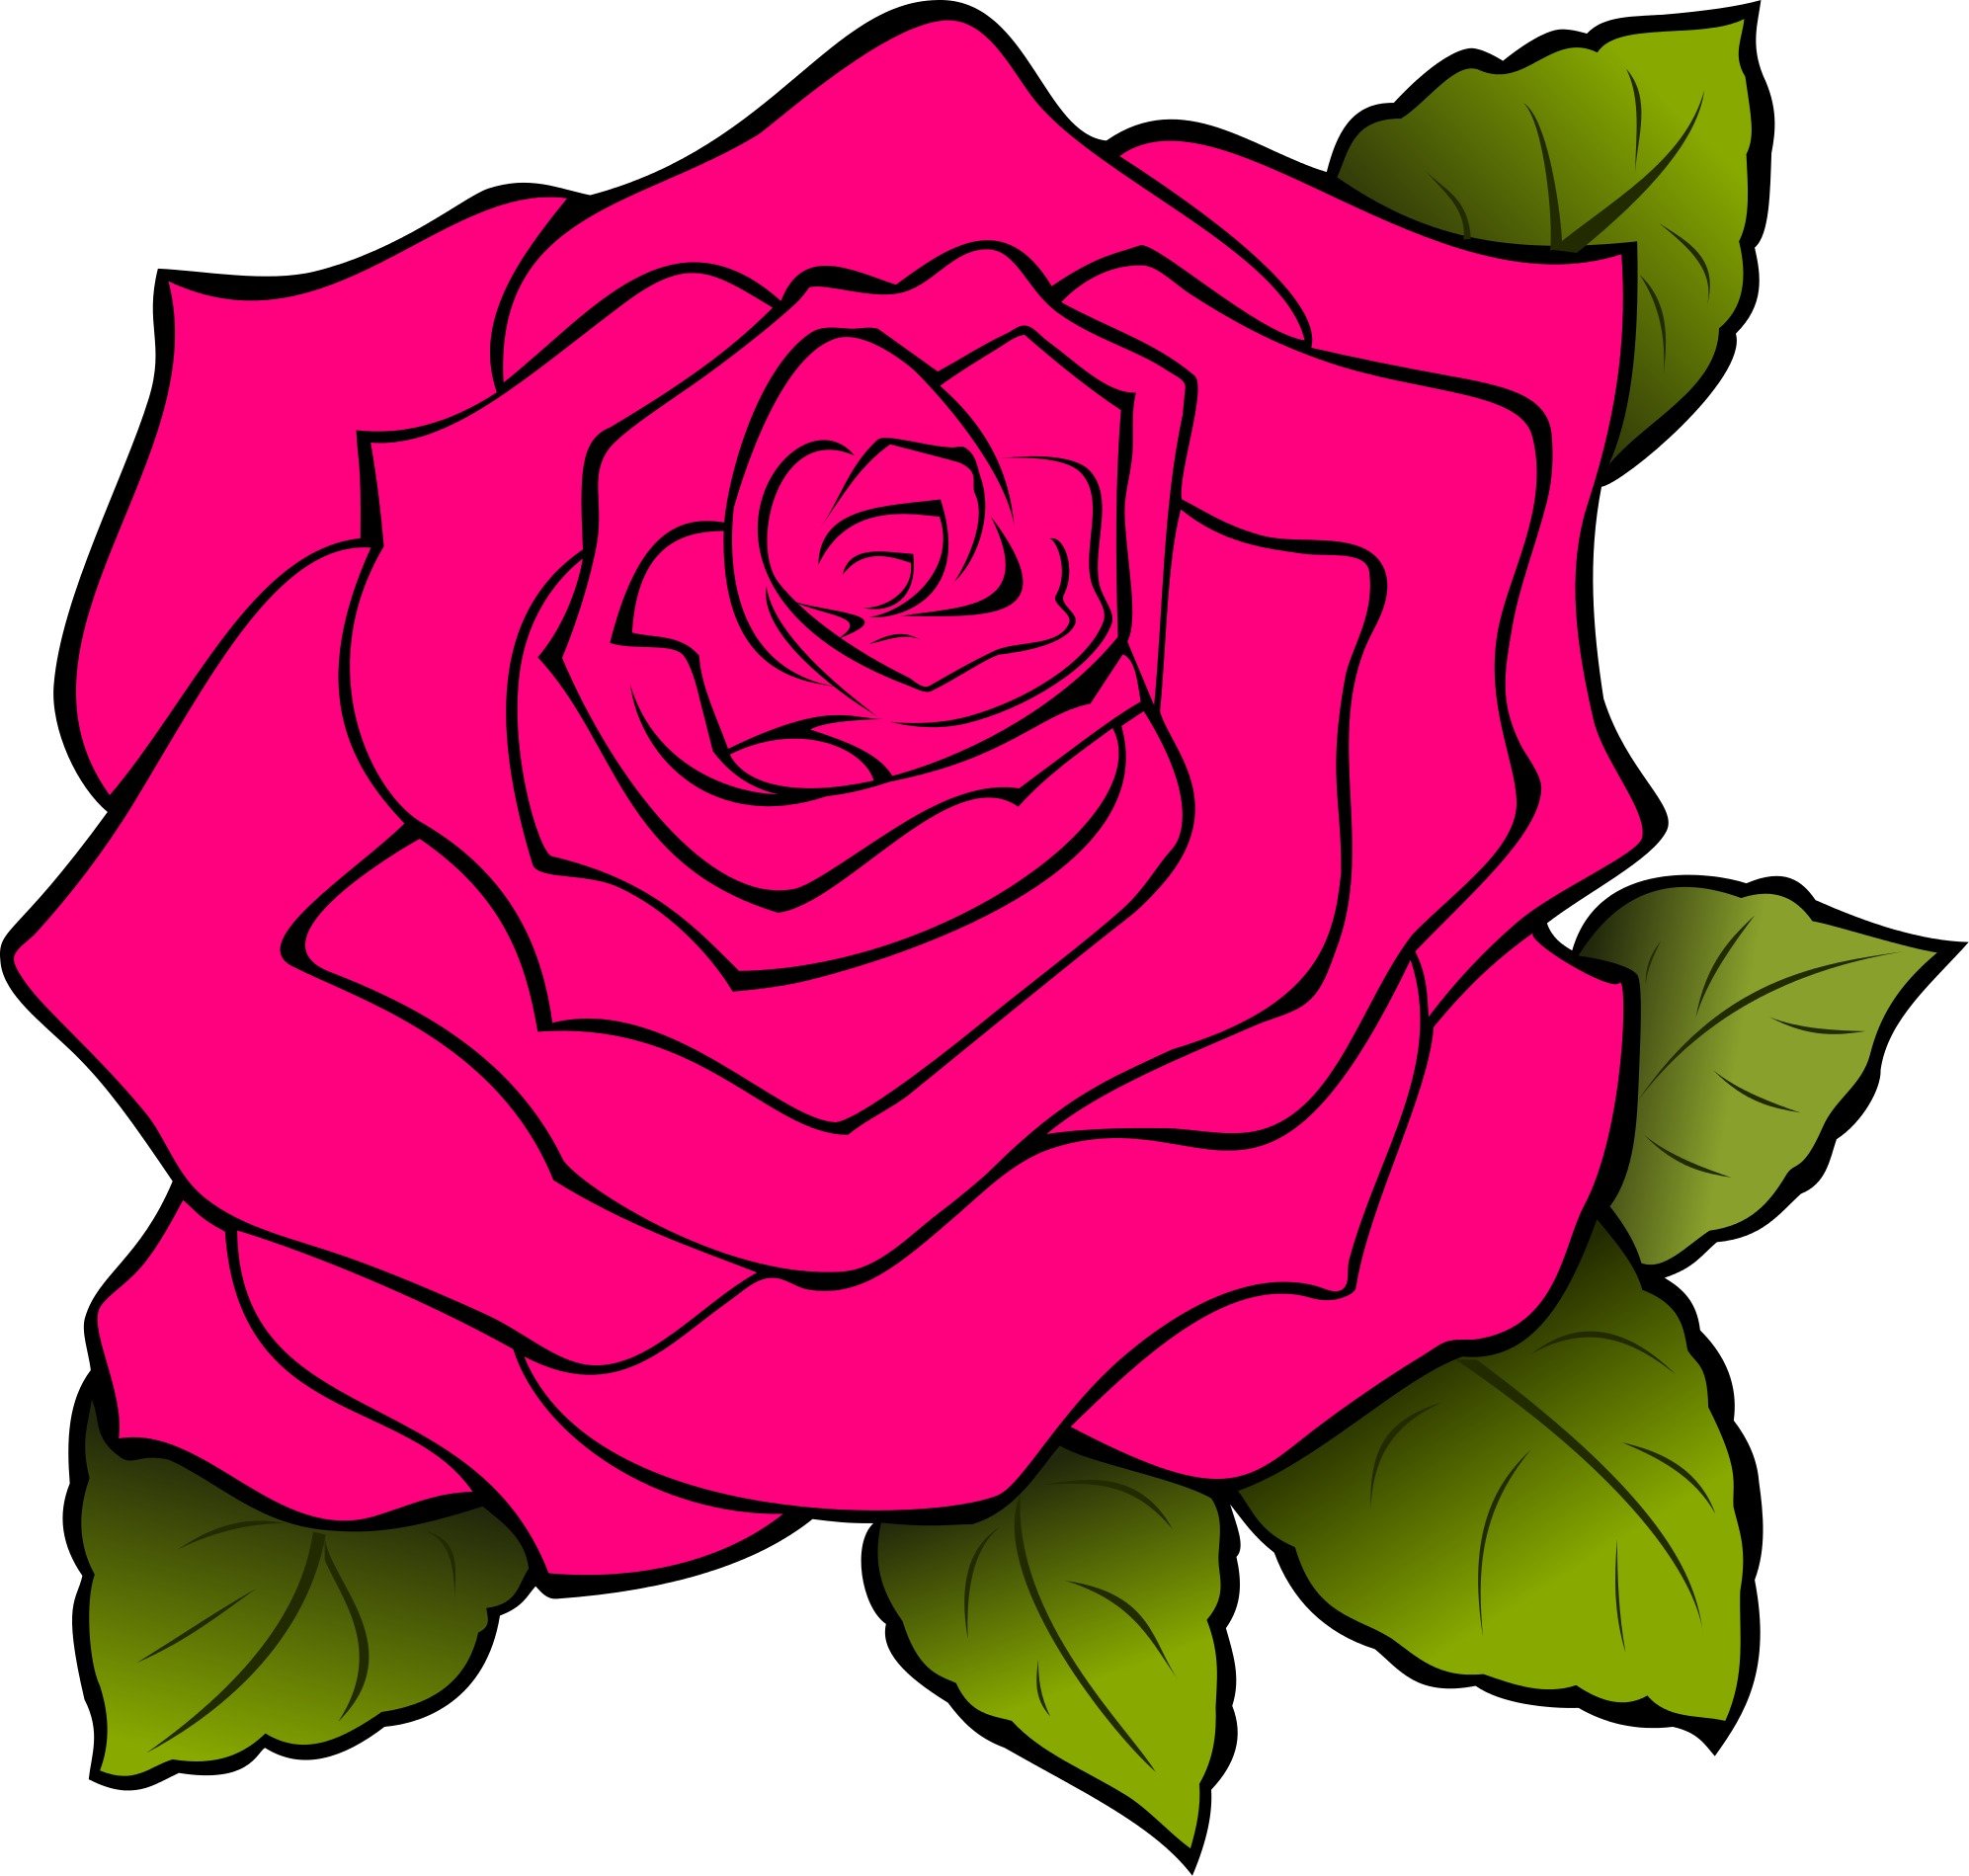 Depiction of a pink rose free image